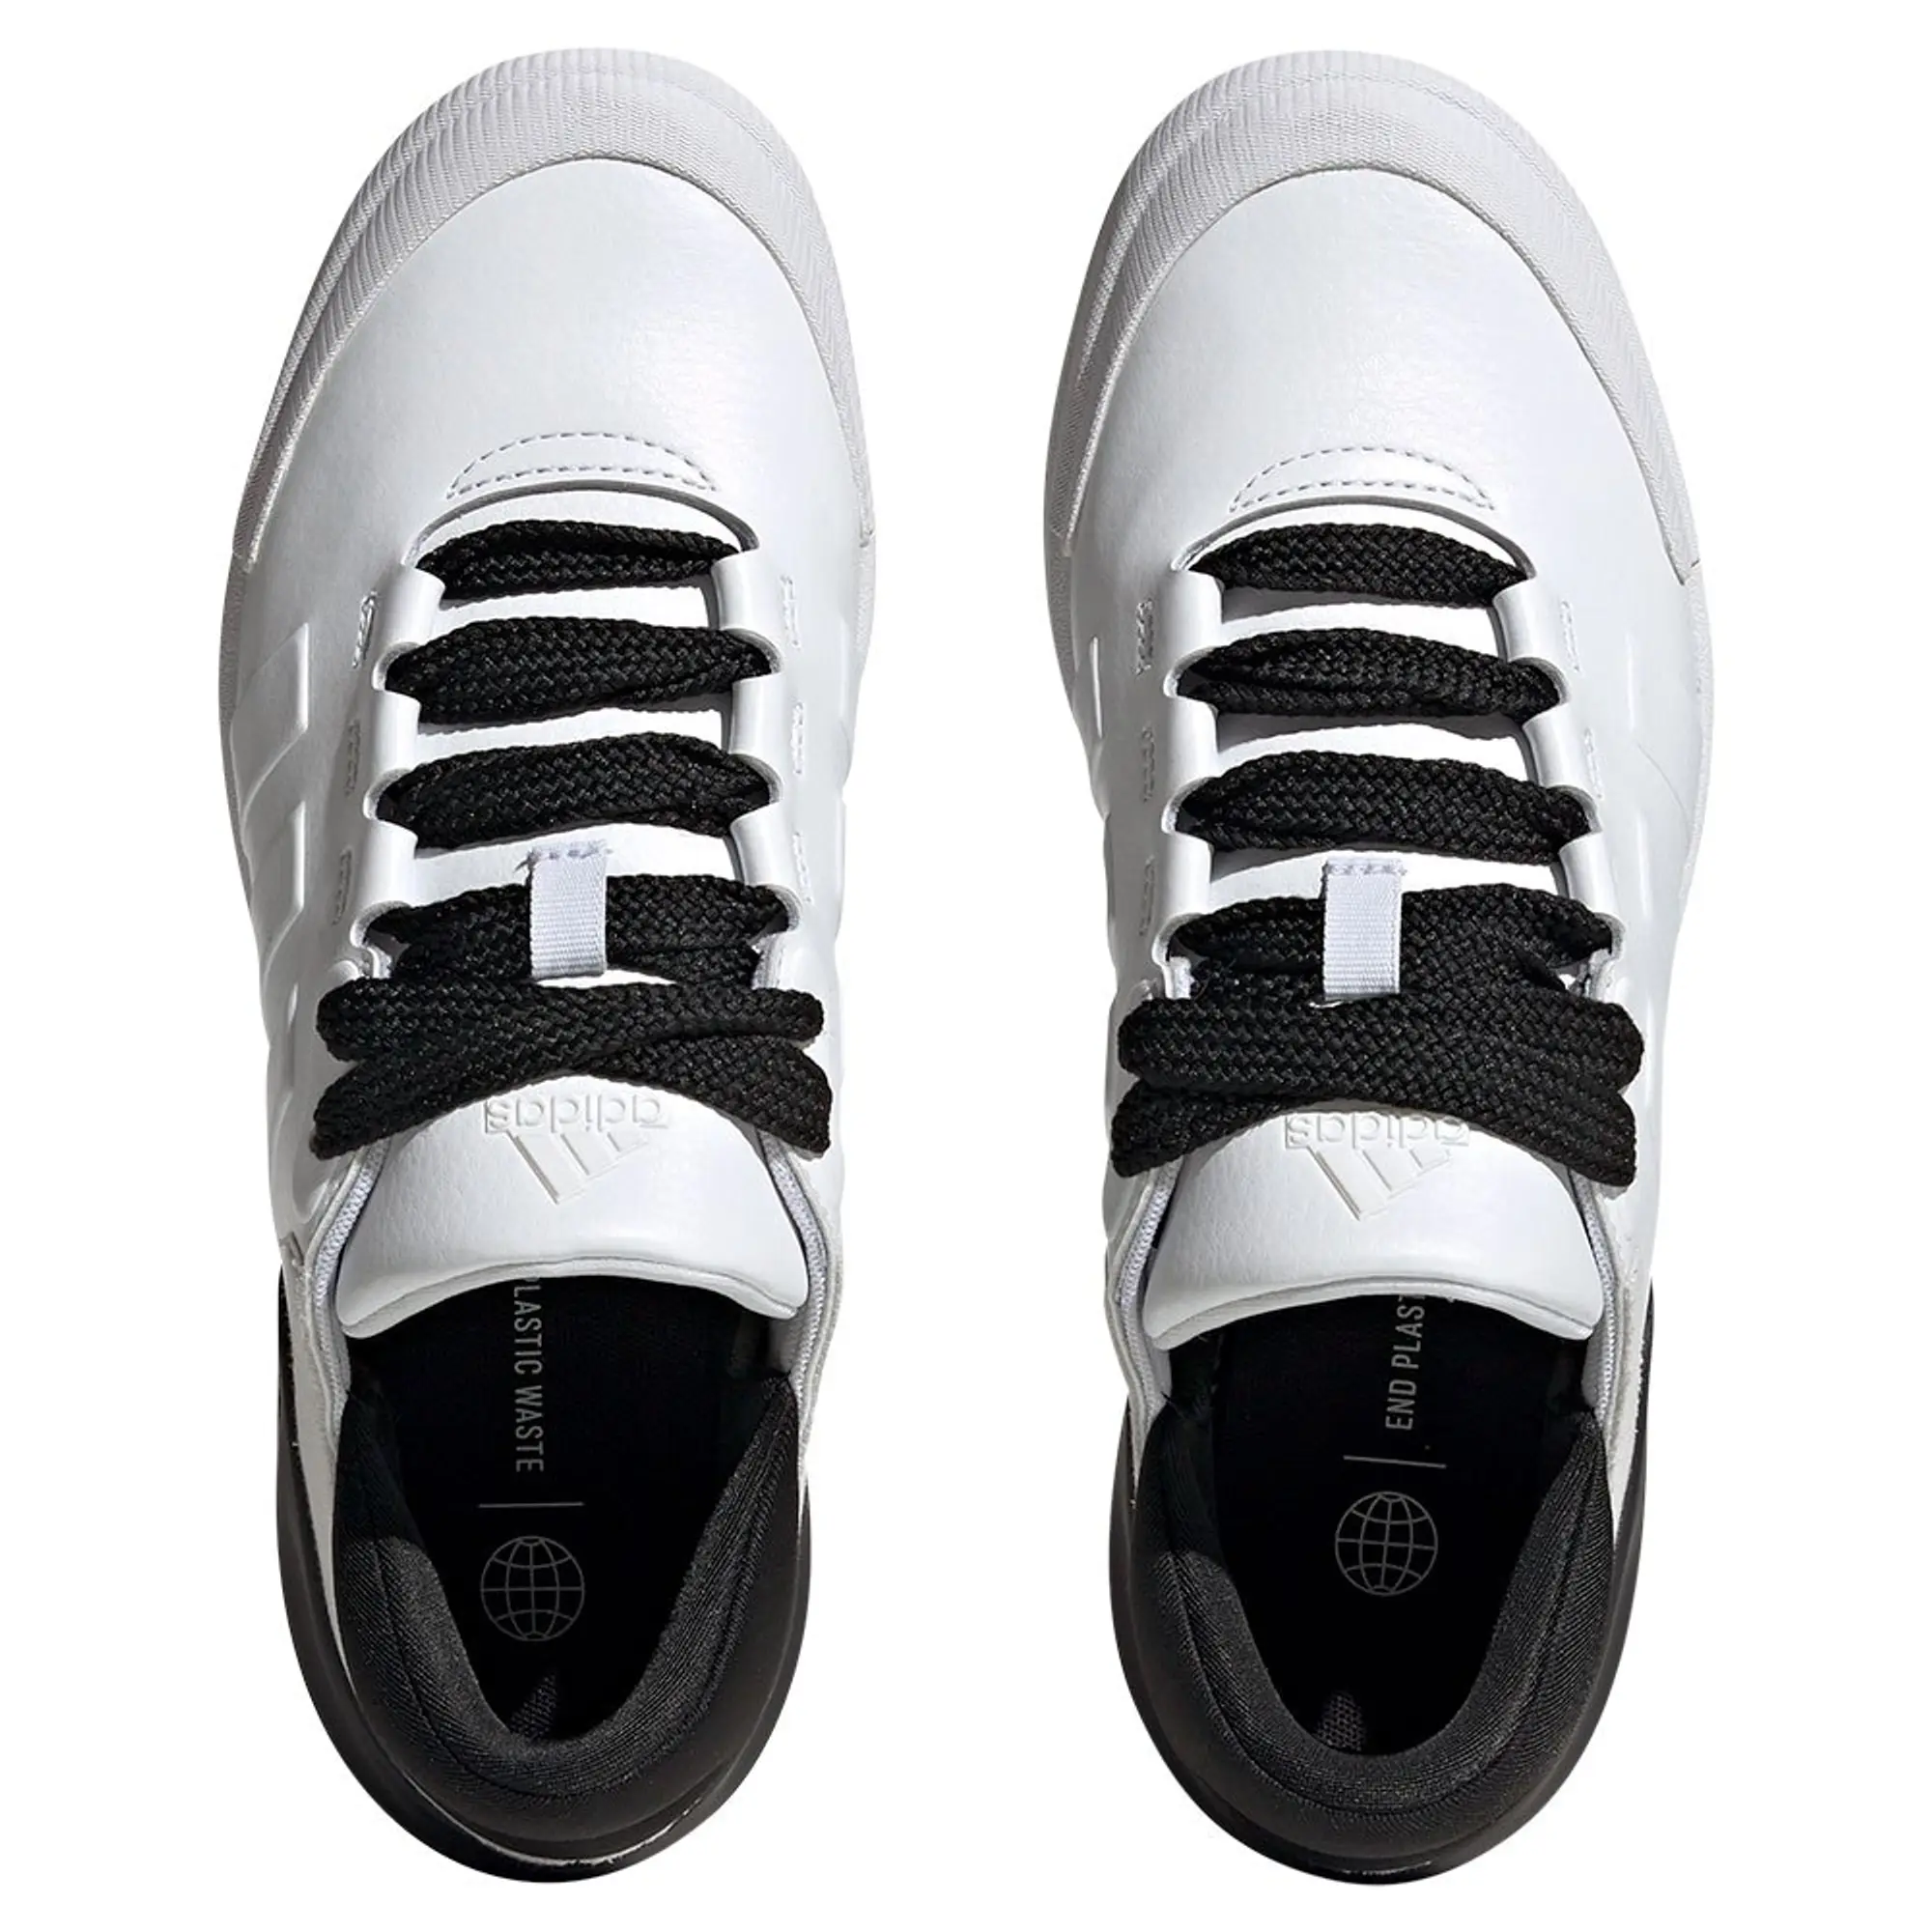 adidas Court Funk Trainers - White - Womens